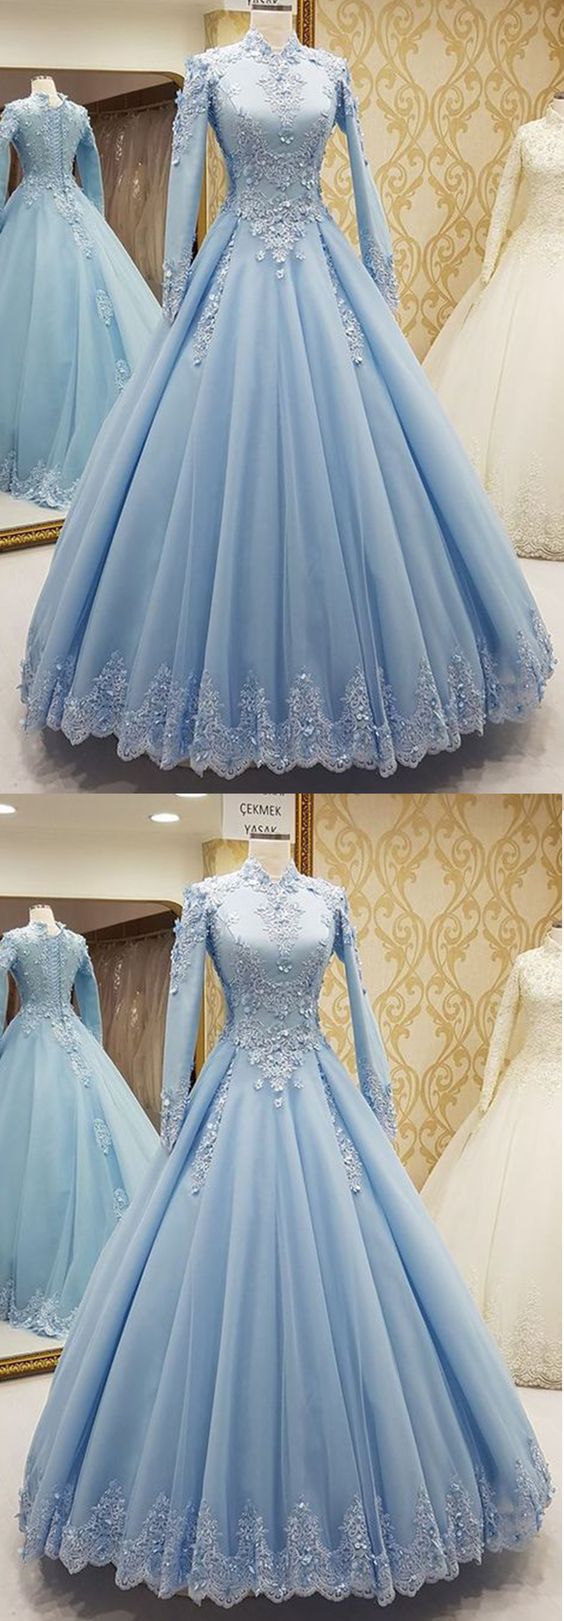 Blue Tulle Party Dress, High Neck Formal Evening Dress, With Long Sleeves